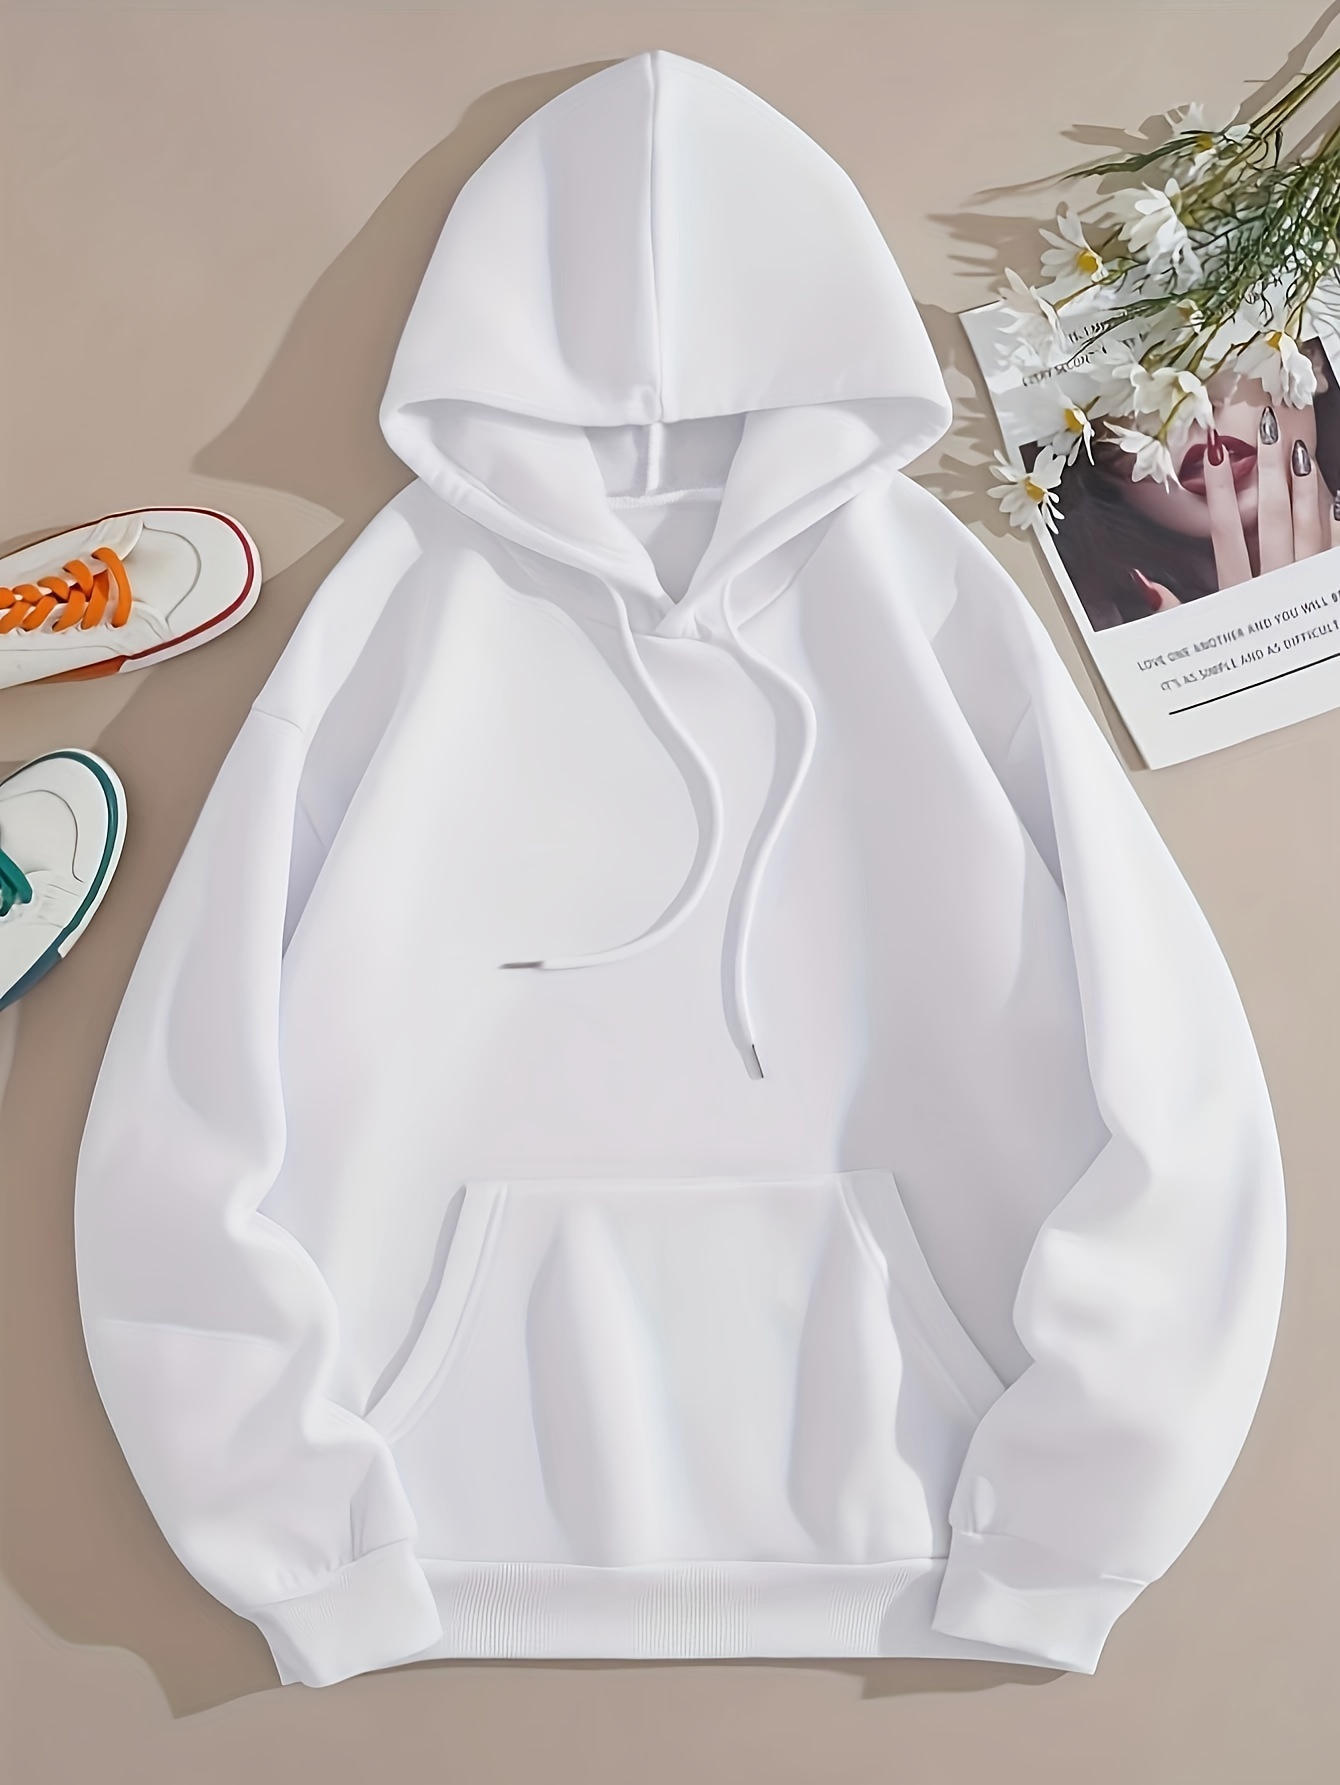 img.kwcdn.com/product/white-thermal-hoodies/d69d2f